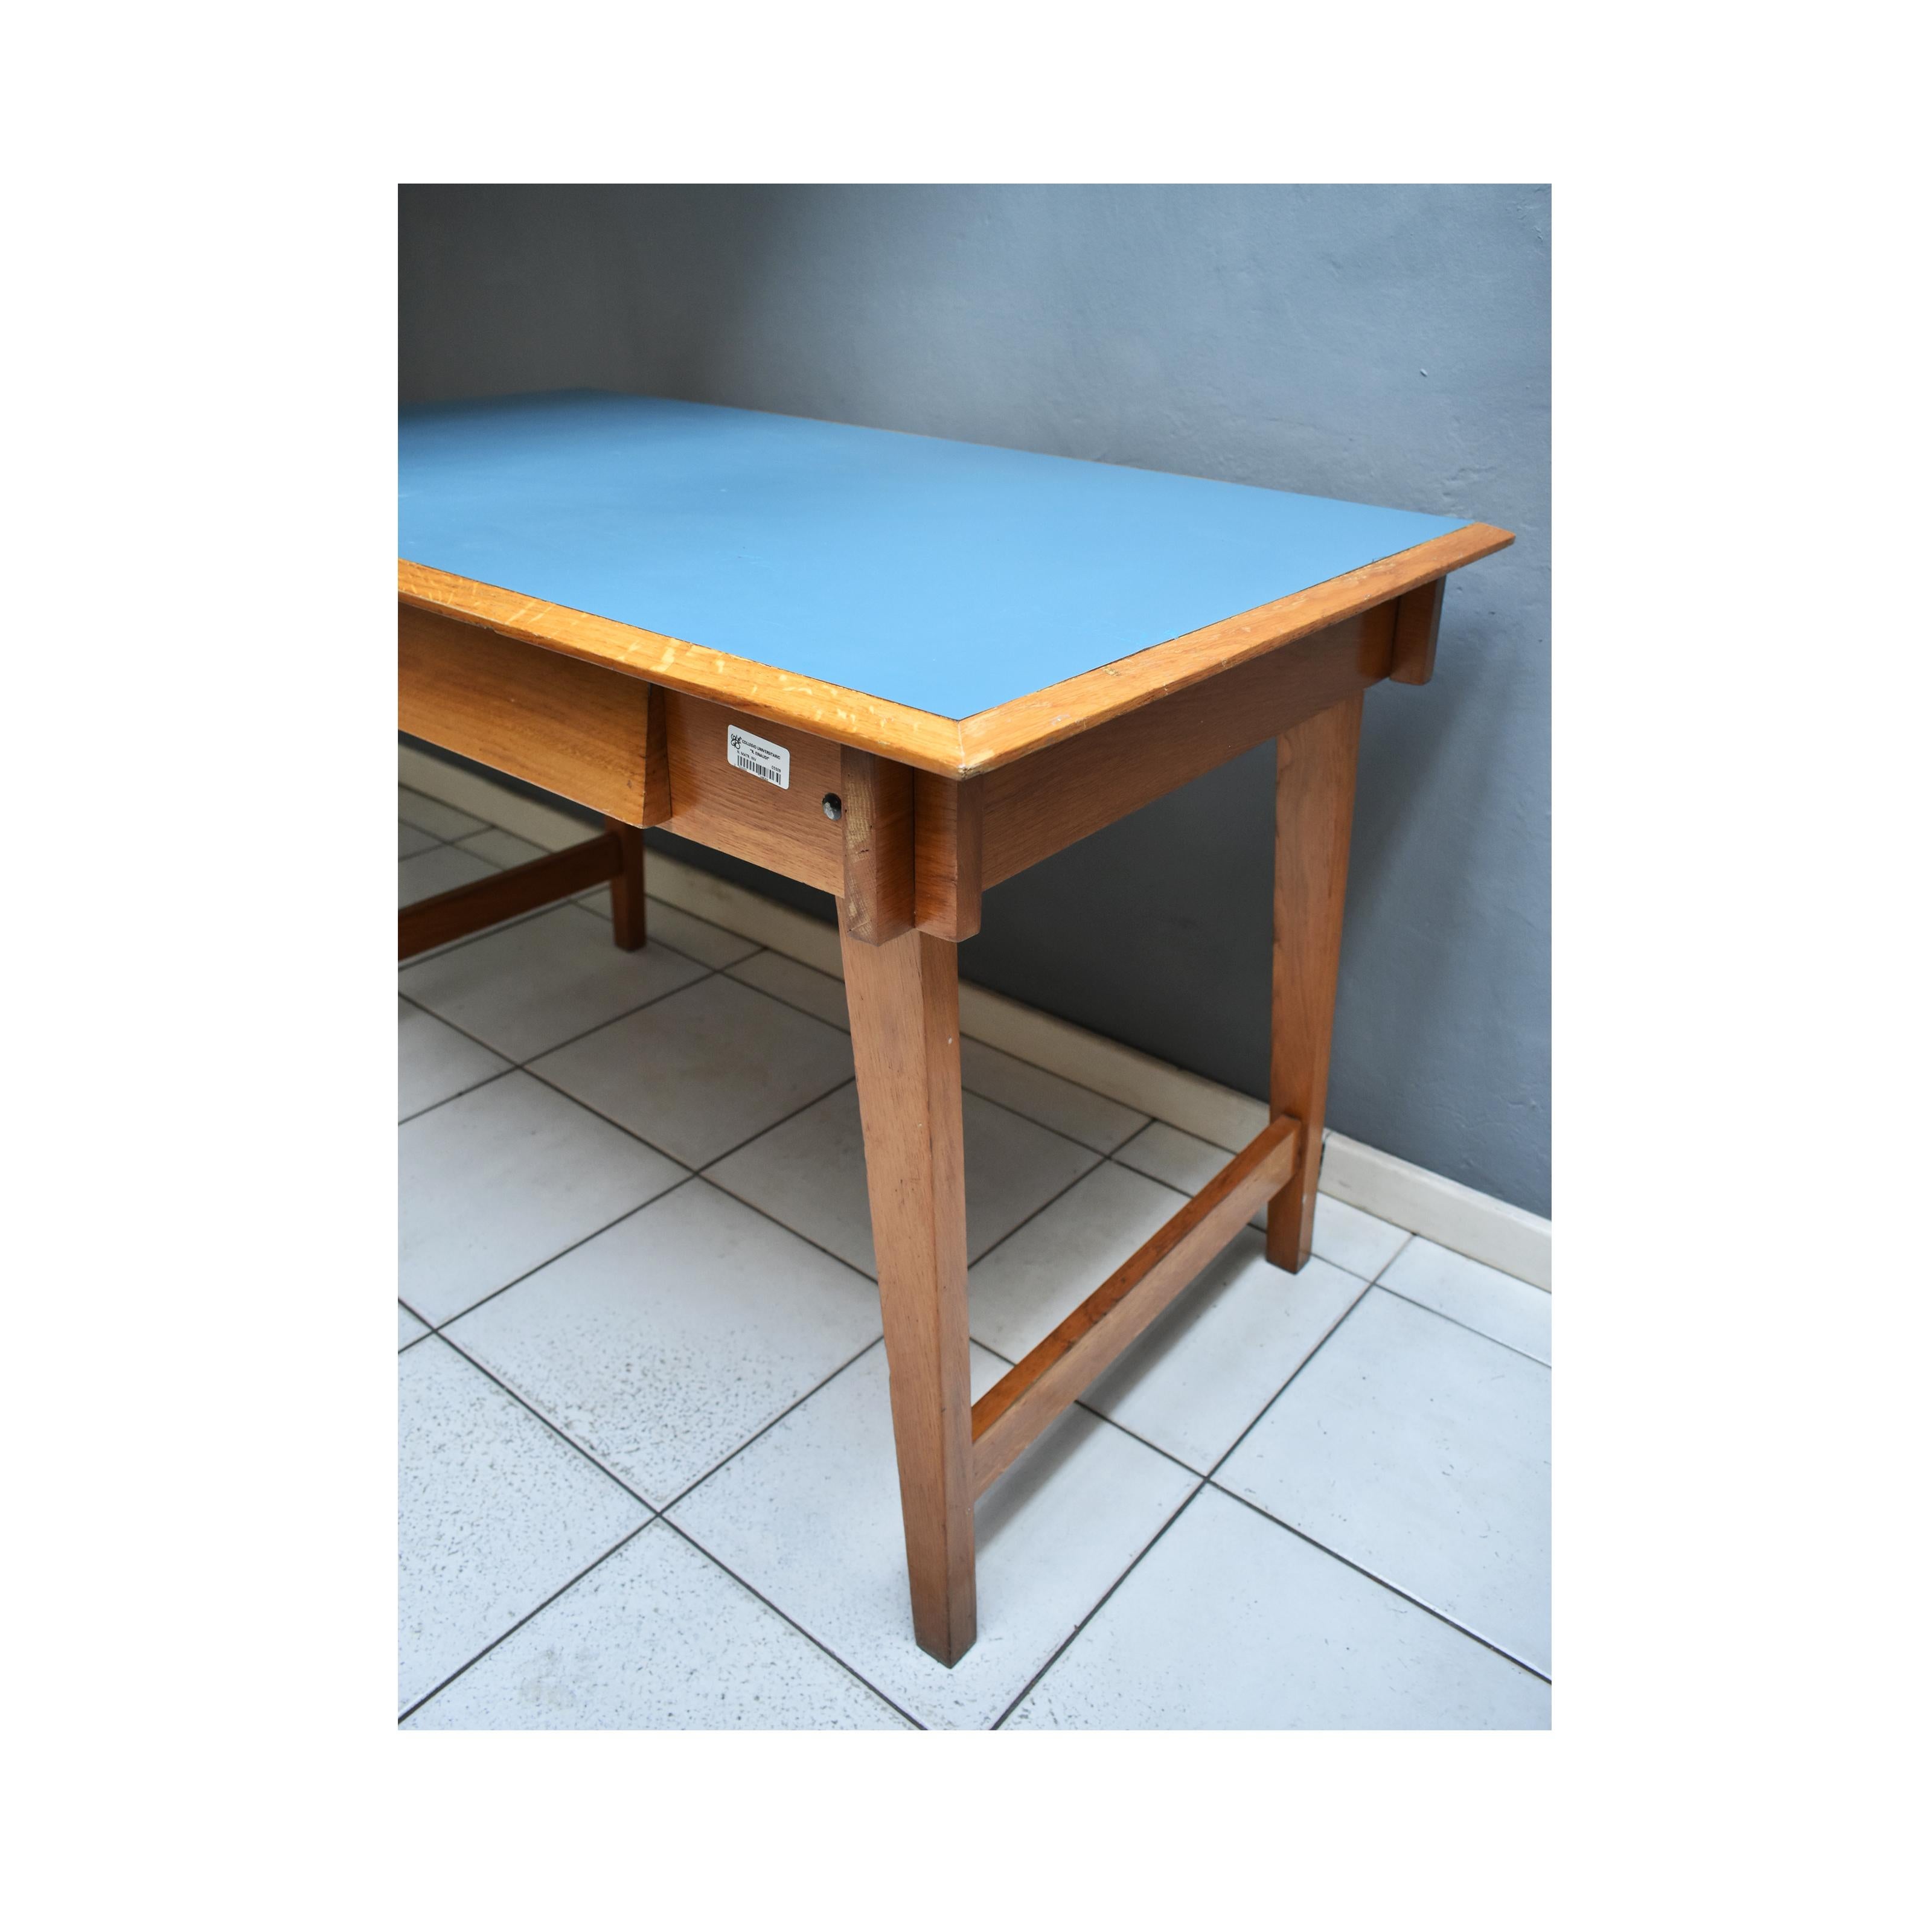  Italian Manufacture, 1960 writing desk in Wood and Light Blue Formica Top 1